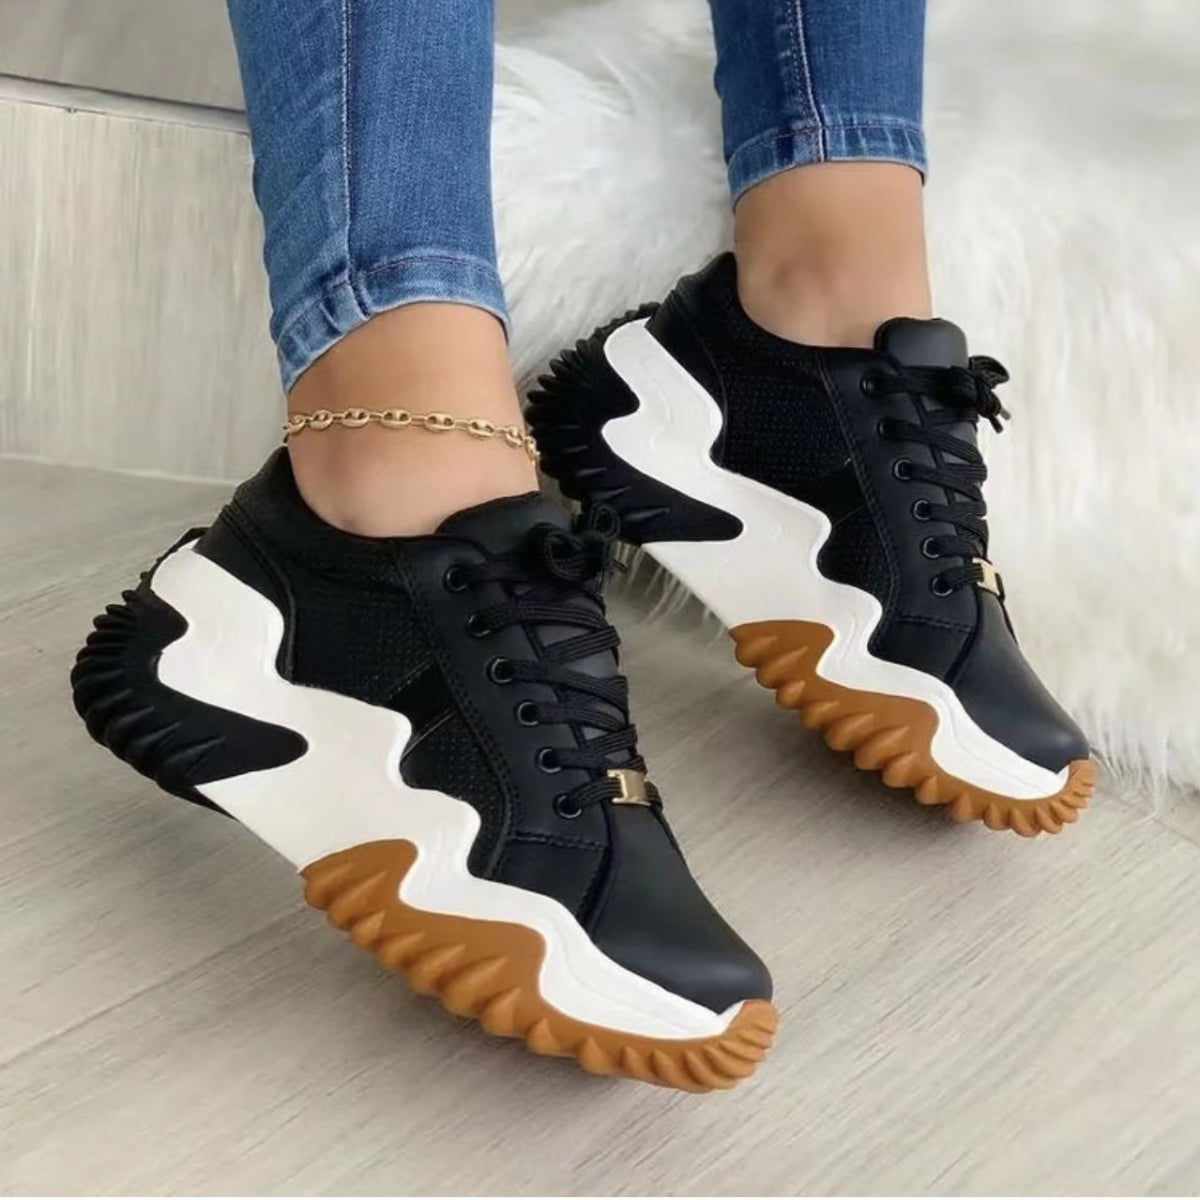 PREORDER- Lace-Up PU Leather Platform Sneakers